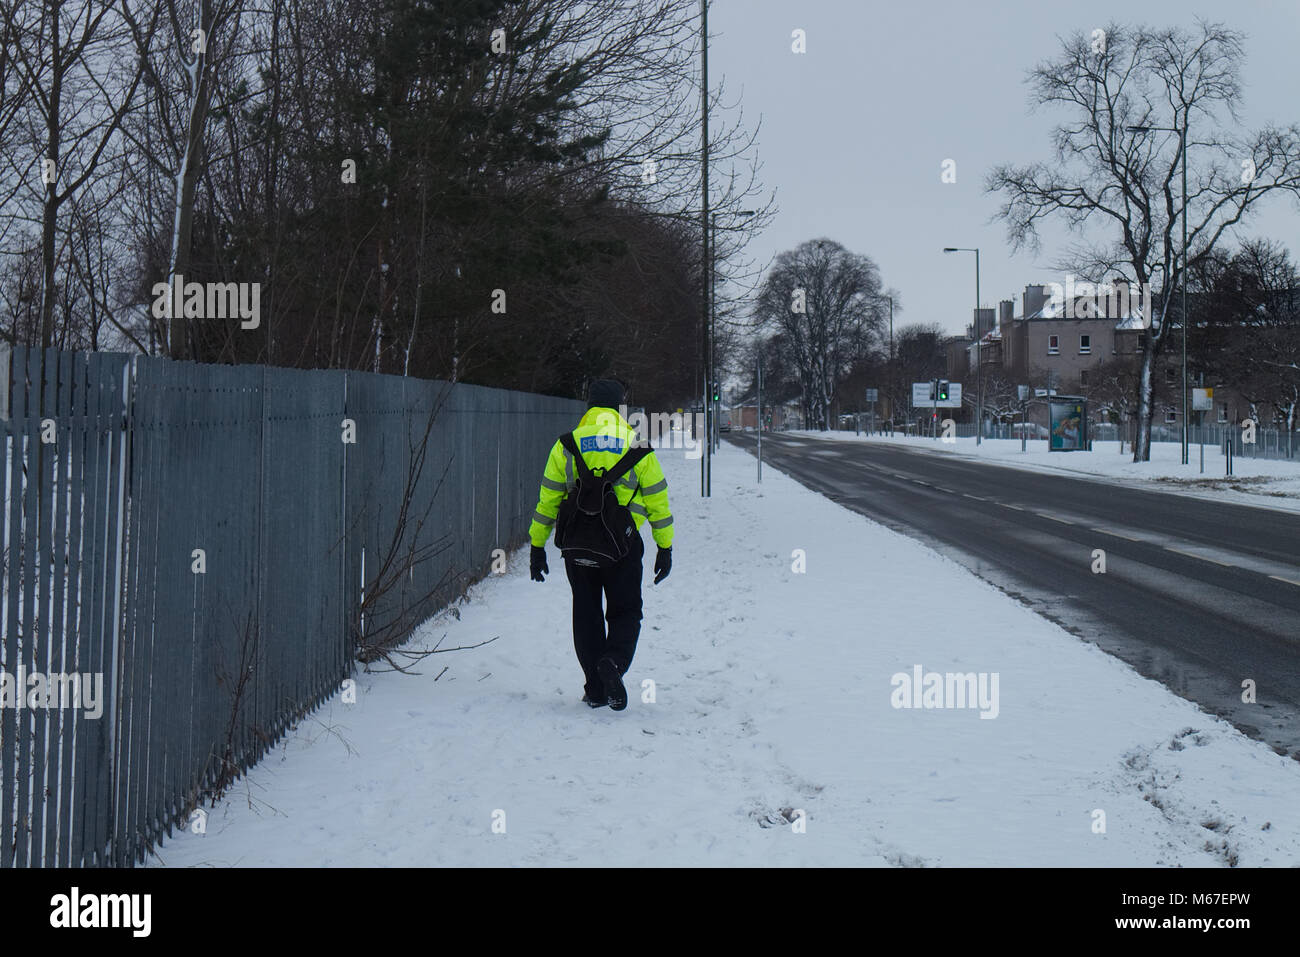 Edinburgh, Scotland, UK. 1st March, 2018. A security guard is walking home from work along a deserted road as there is no public transport running during the Beast of the East storm hitting Edinburgh, Scotland. Credit: Iscotlanda/Alamy Live News Stock Photo